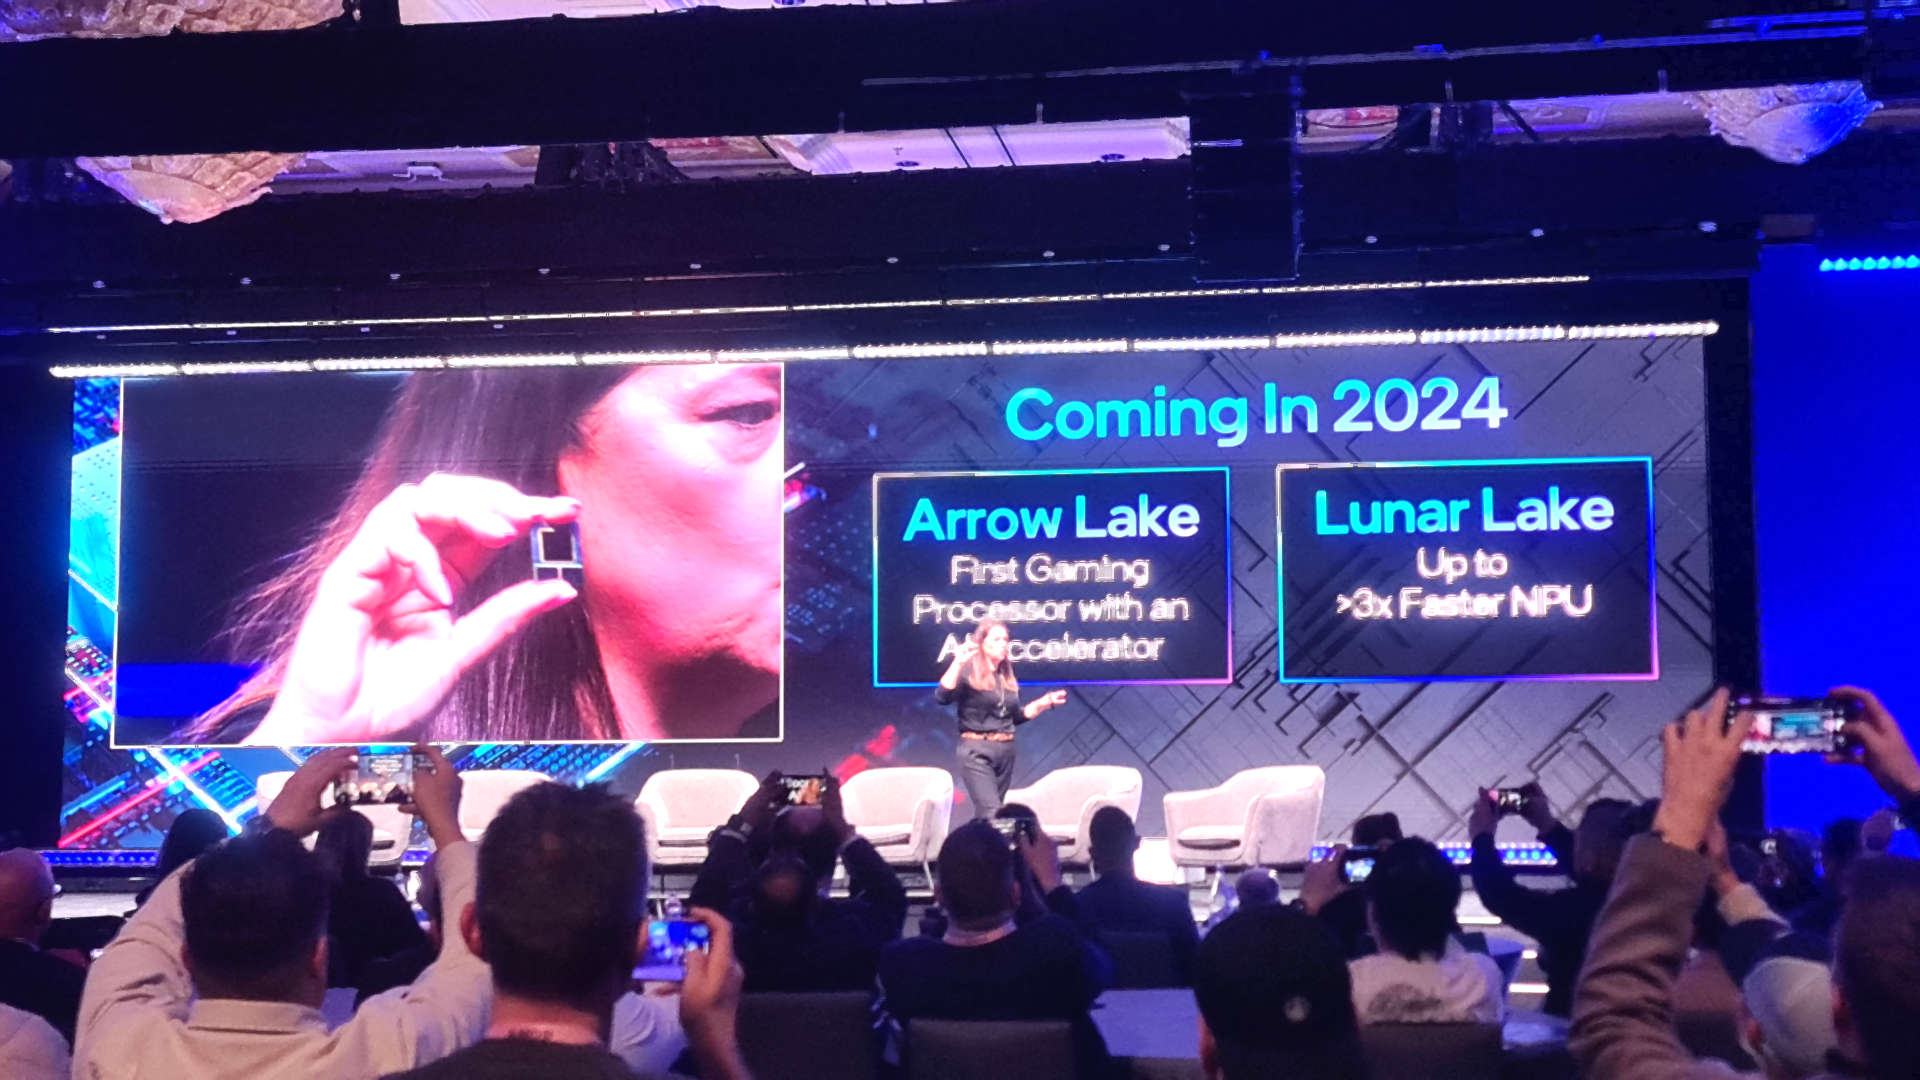  Intel's Lunar Lake is on track for a 2024 appearance, along with significant IPC gains in the CPU core and three times more AI performance from GPU and NPU 